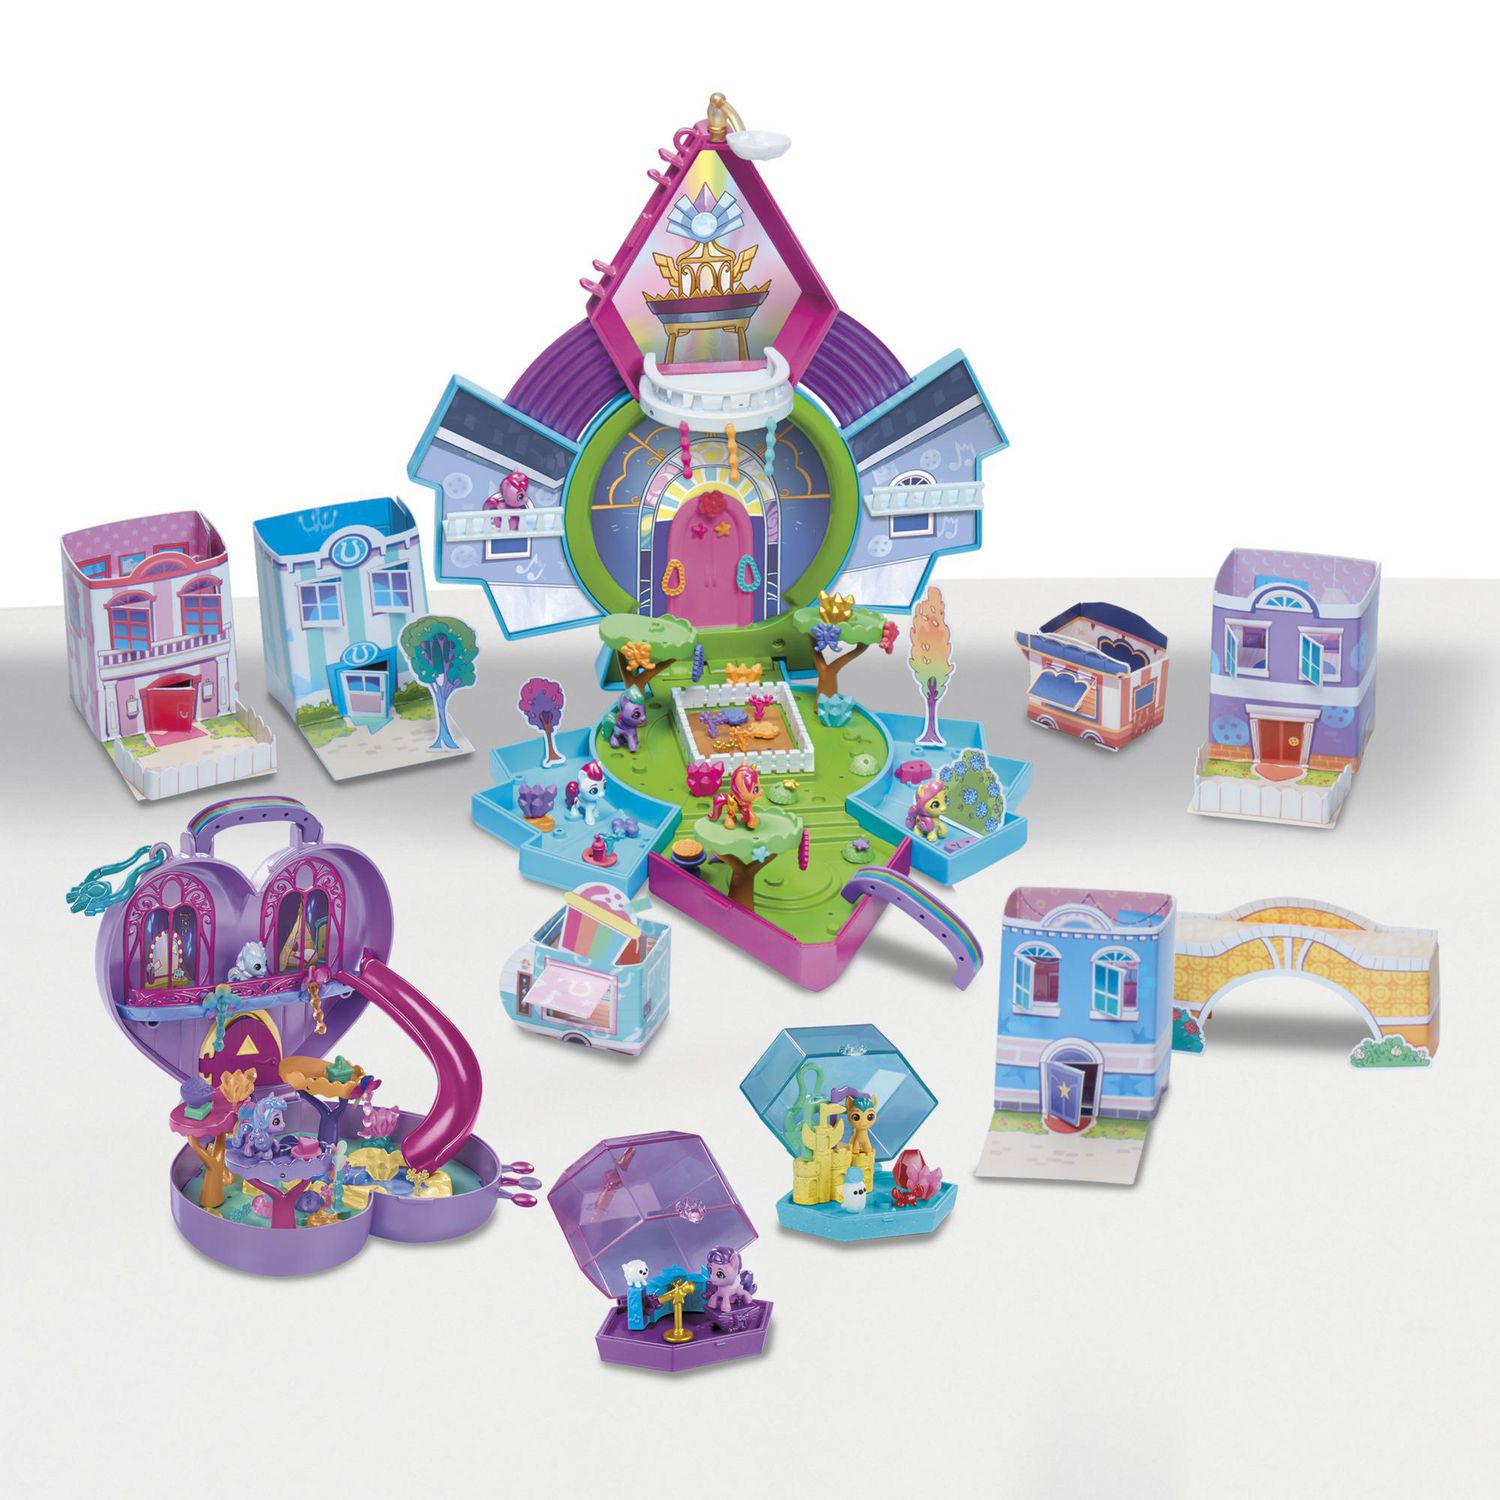 Little　with　Collection　Mini　Customizable　Mini　Pieces　World　Over　Set　Magic　Playset　Equestria　My　Toy　Pony　120